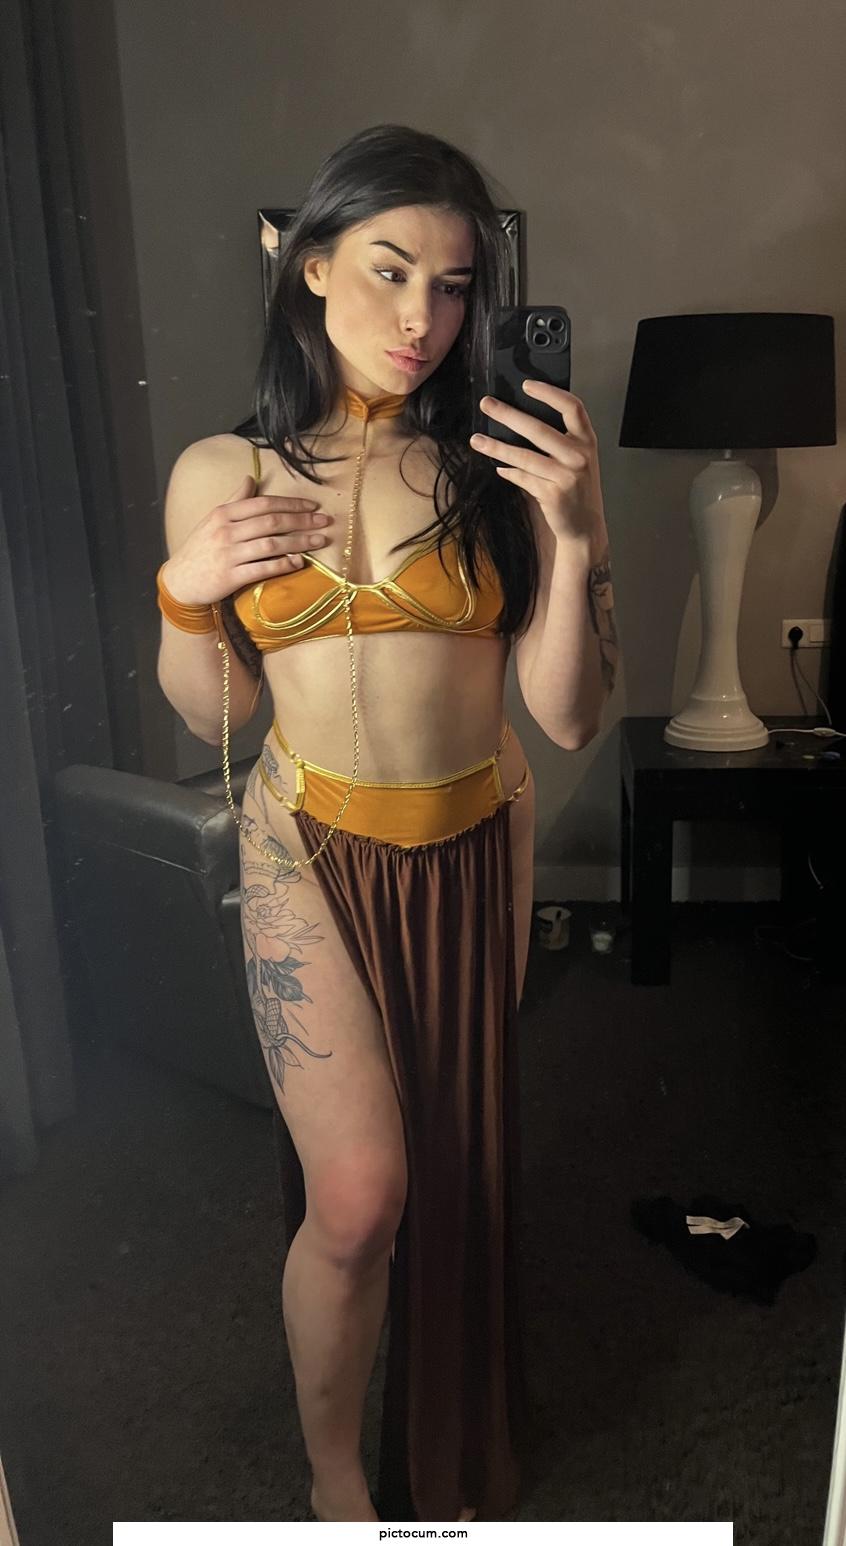 Slave girl Leia from Starwars - How did i do